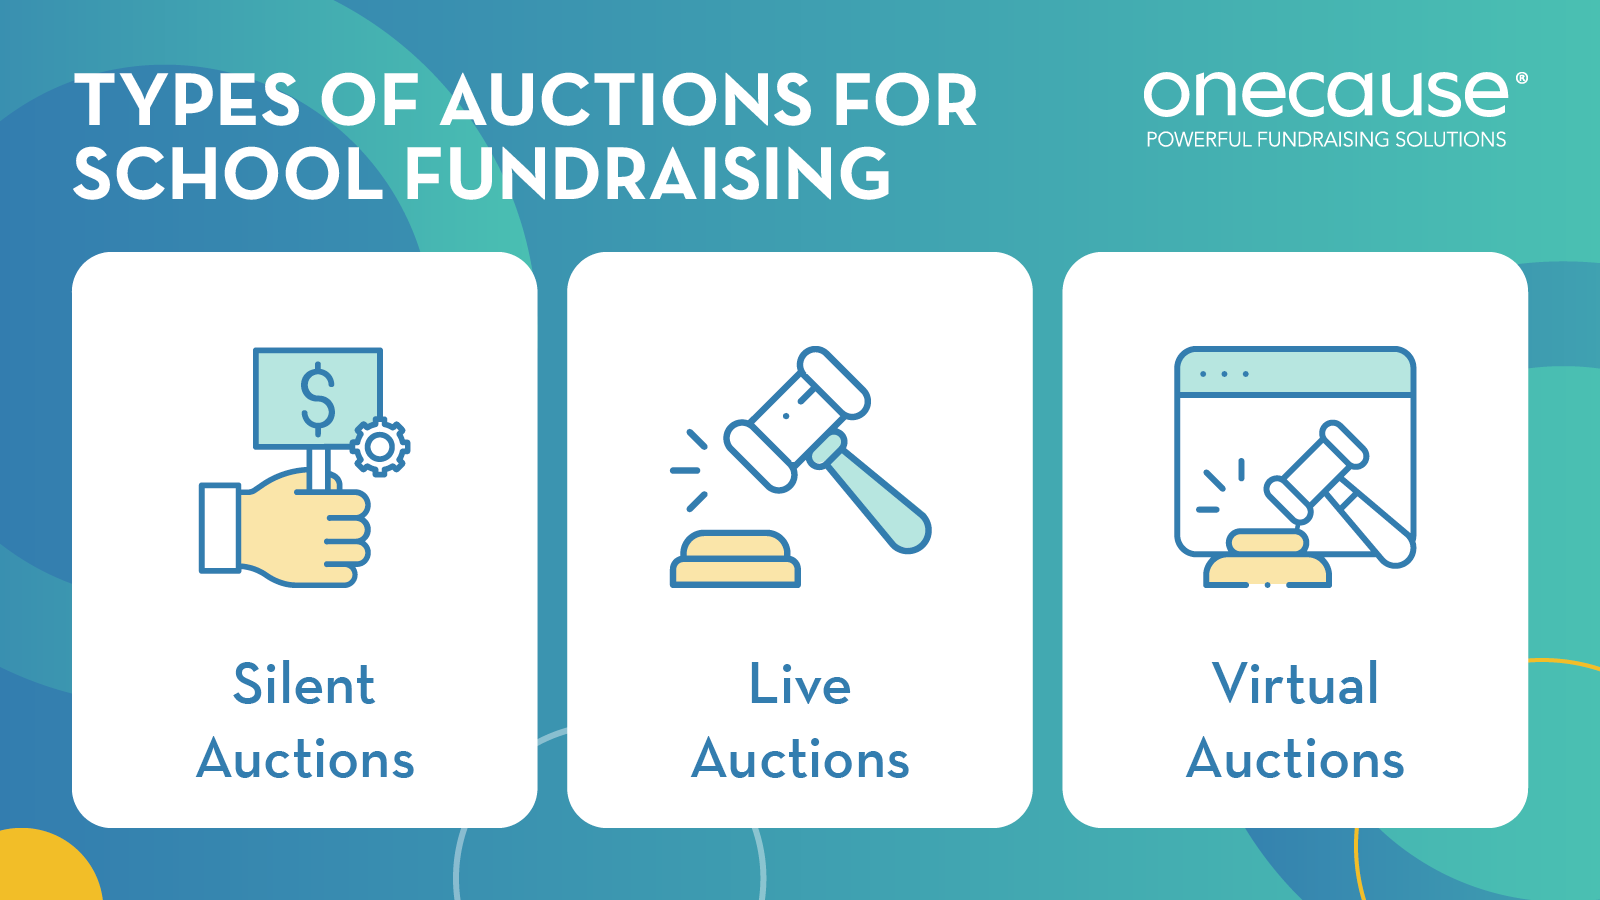 Three types of auctions for school fundraising, also described in the text below.